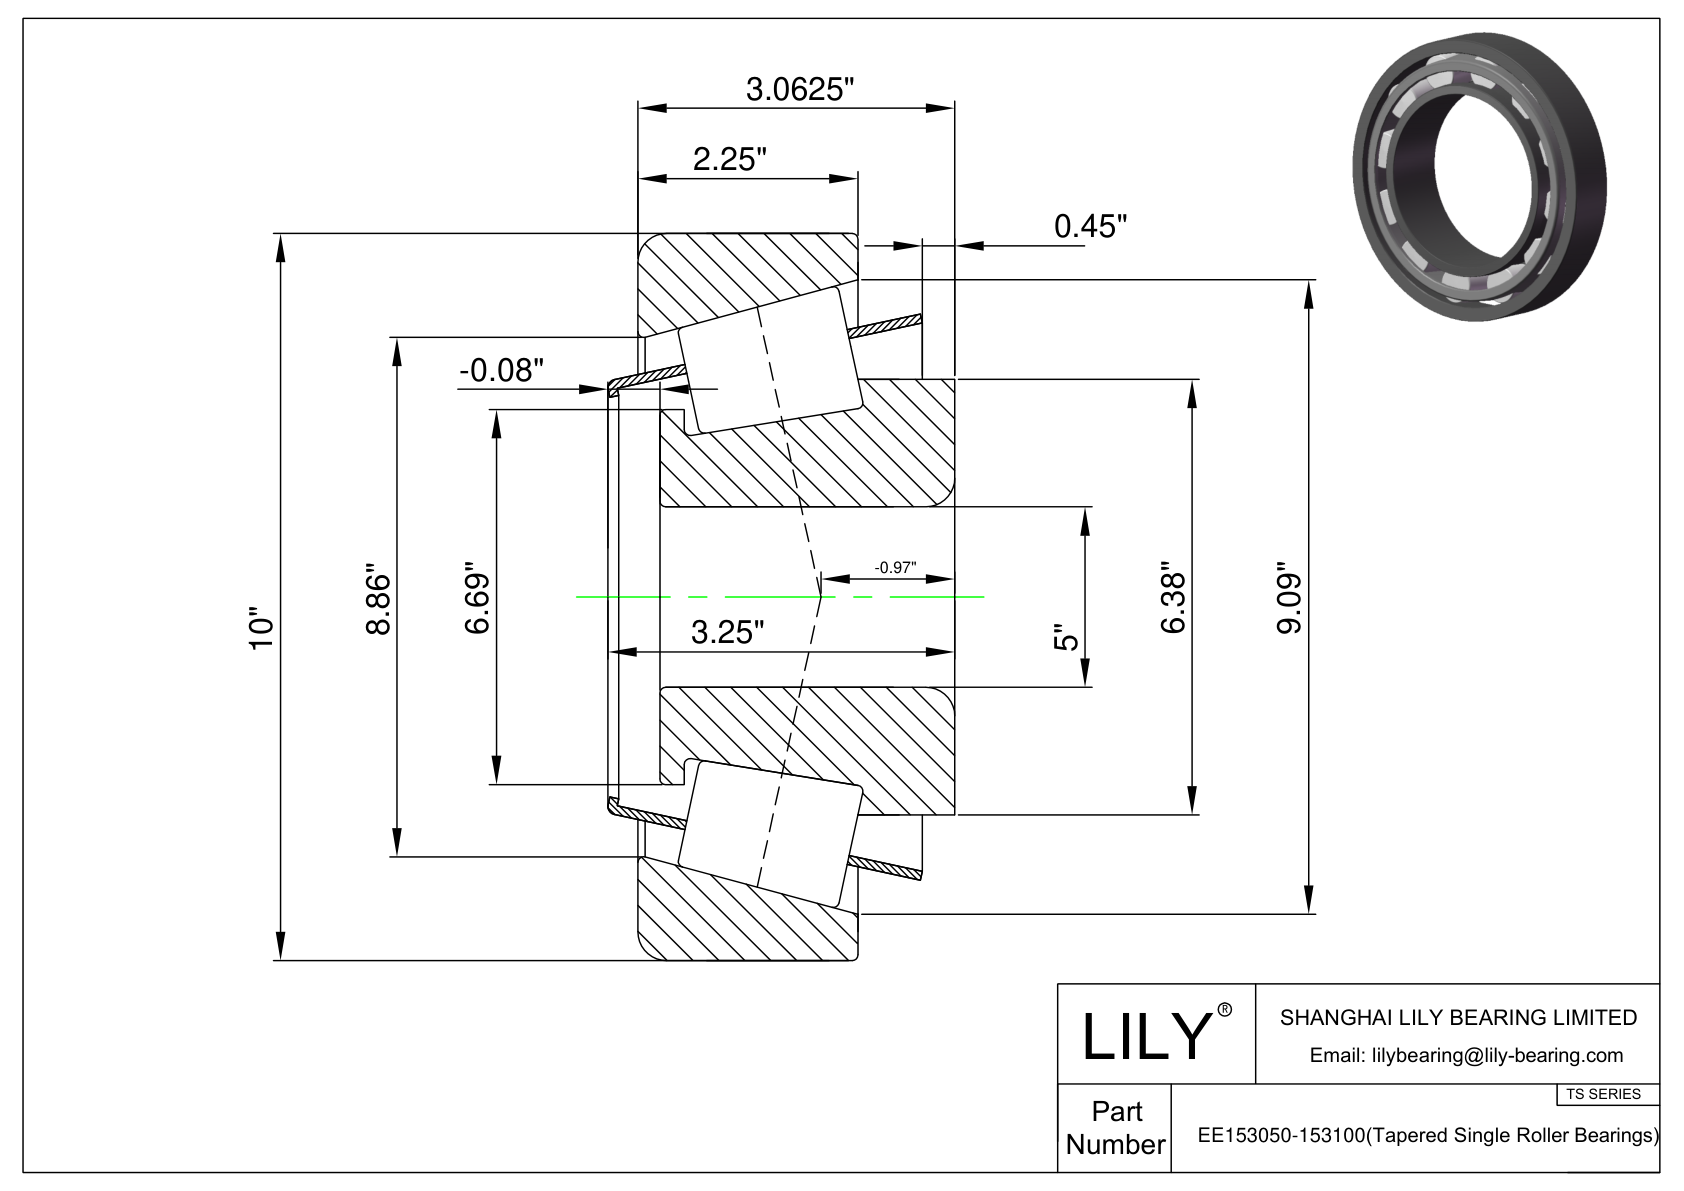 EE153050-153100 TS (Tapered Single Roller Bearings) (Imperial) cad drawing